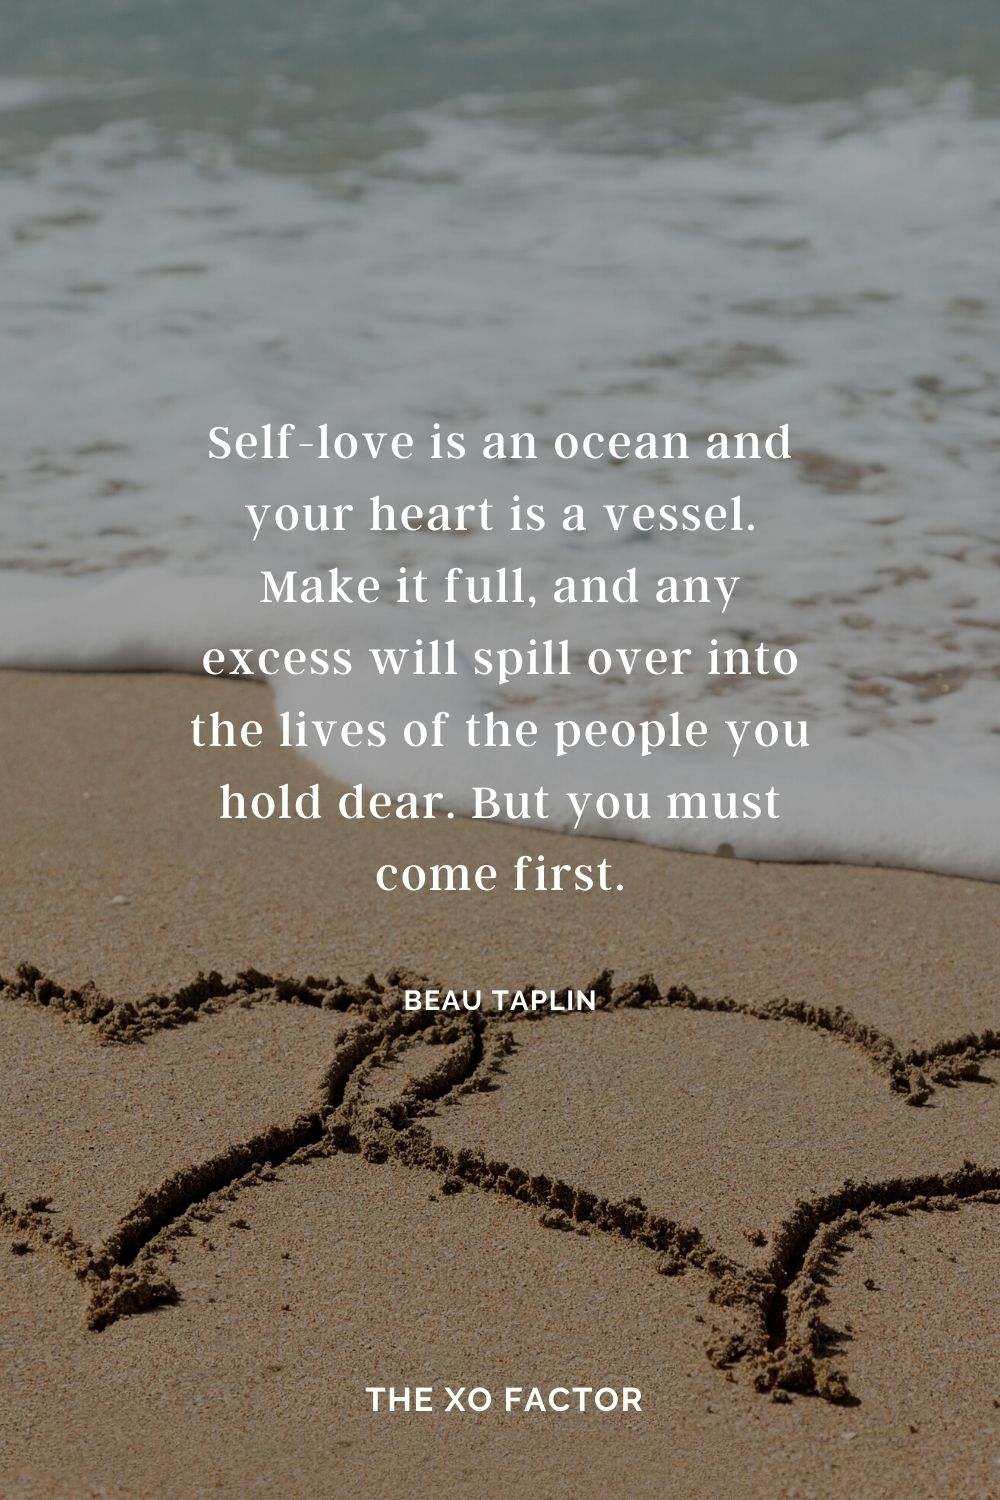 Self-love is an ocean and your heart is a vessel. Make it full, and any excess will spill over into the lives of the people you hold dear. But you must come first. Beau Taplin